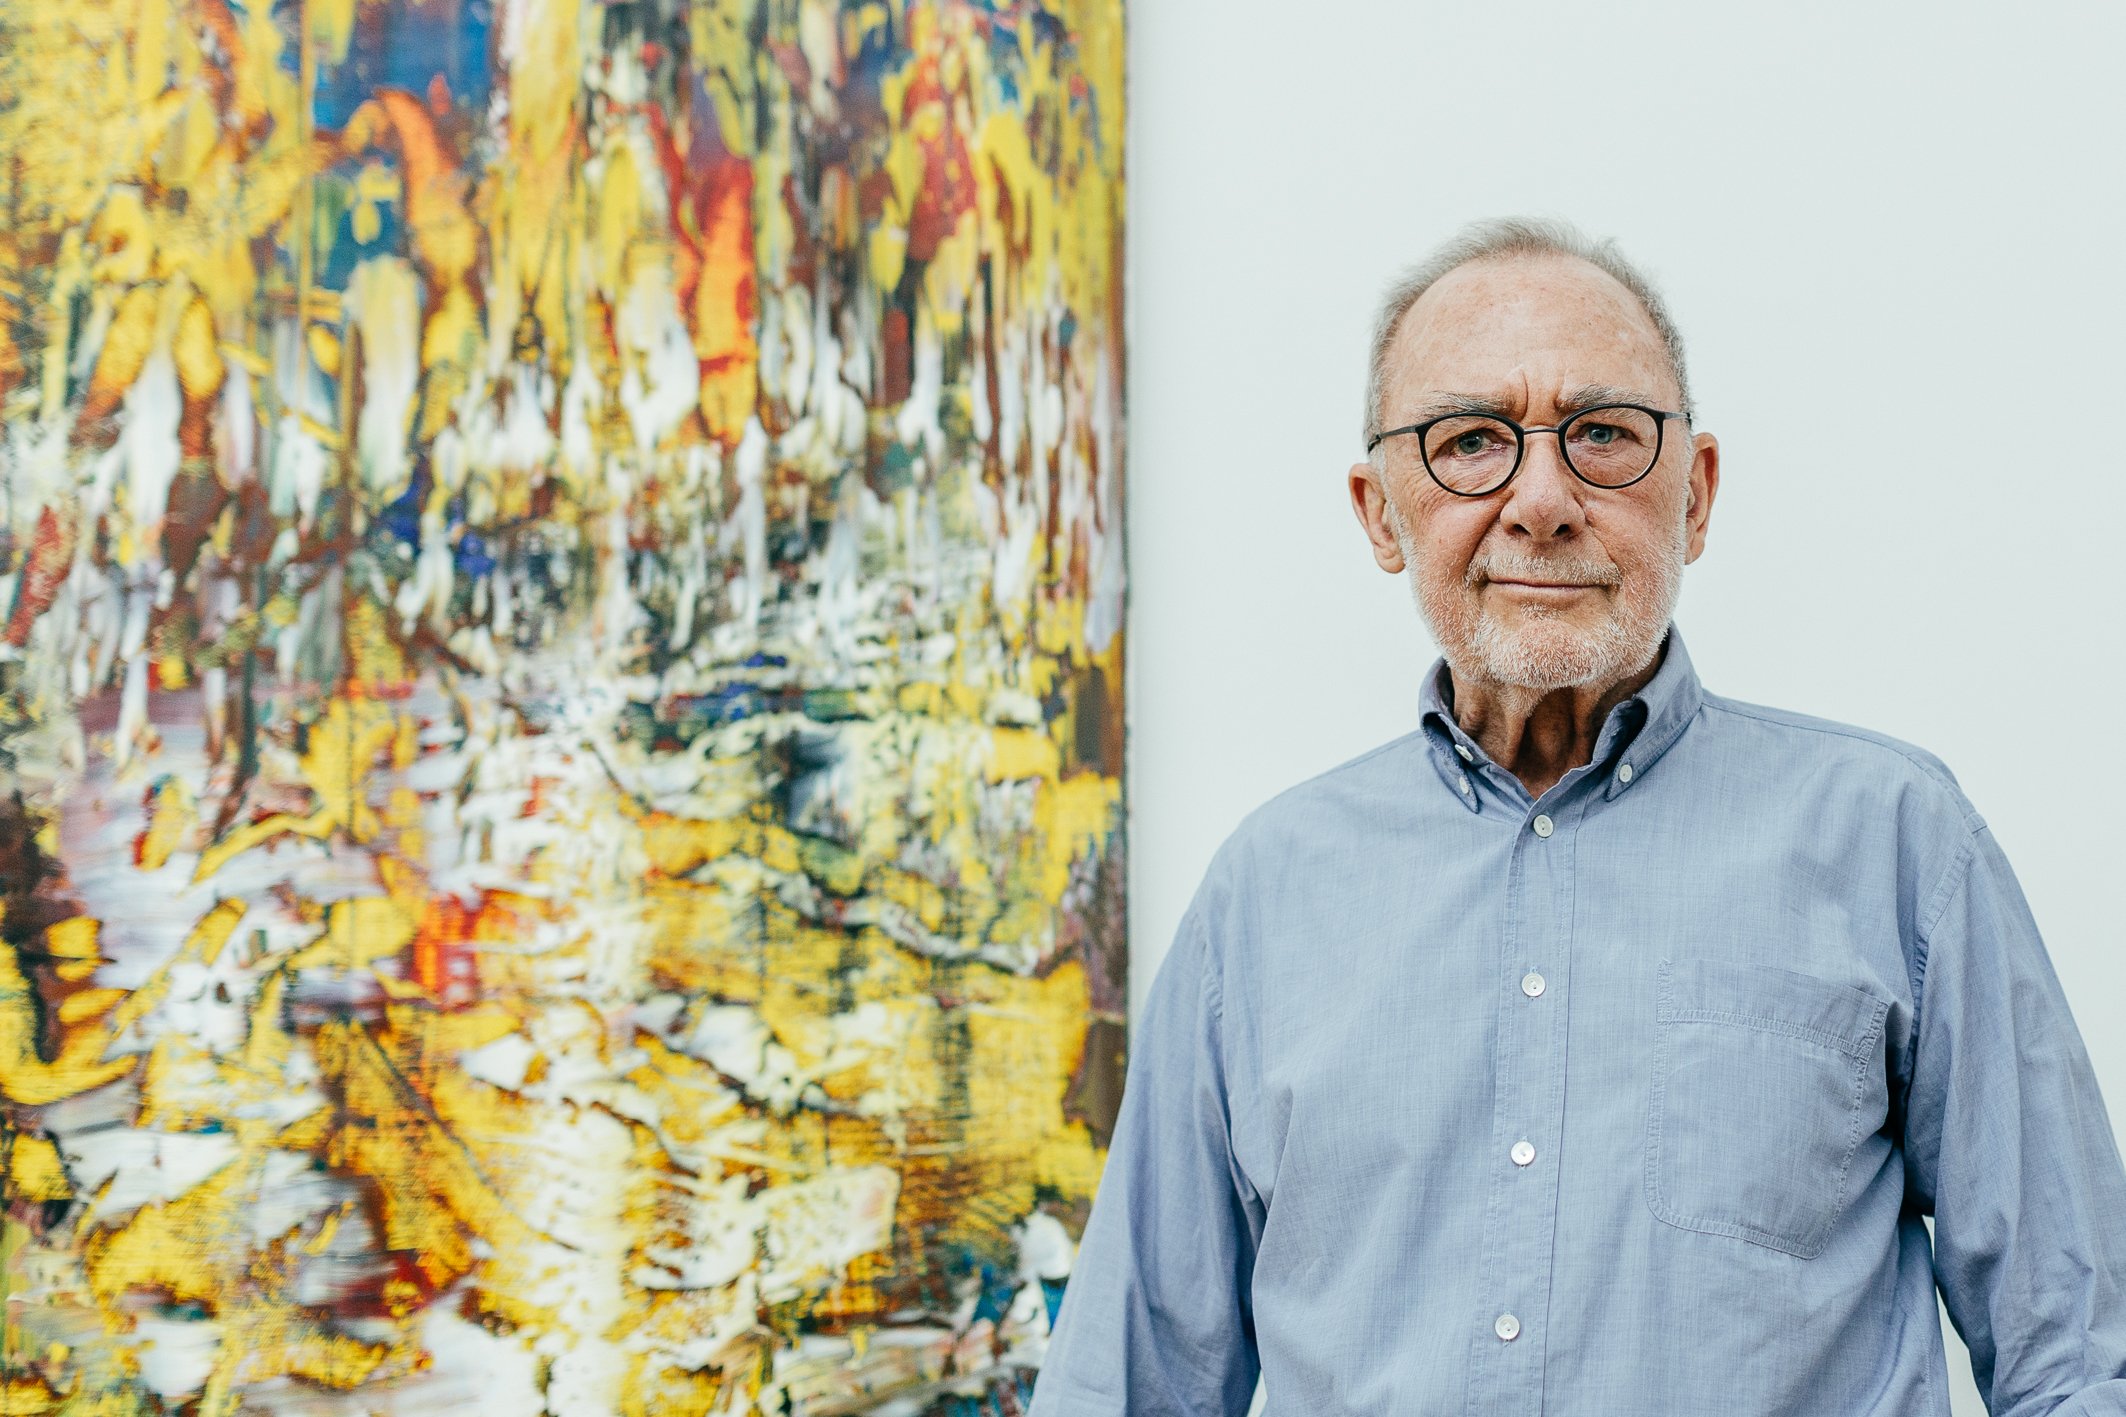 Germany Is Celebrating Gerhard Richter’s 90th Birthday With a Bonanza of Exhibitions. Here’s What to See